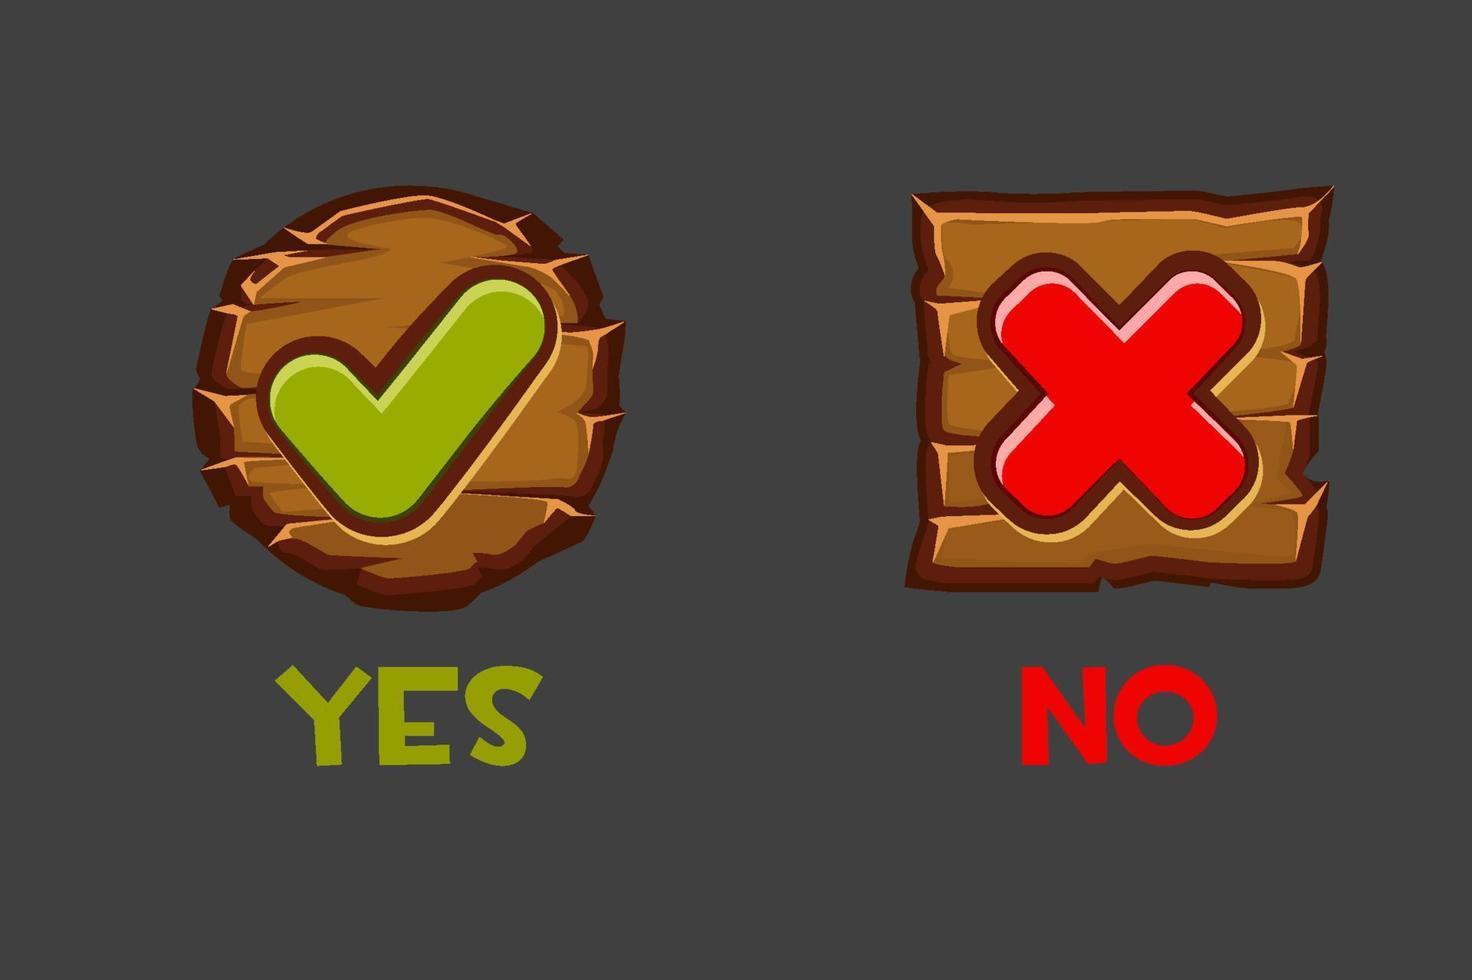 Vector illustration of wooden yes and no buttons. Isolated old wooden buttons for the user interface.